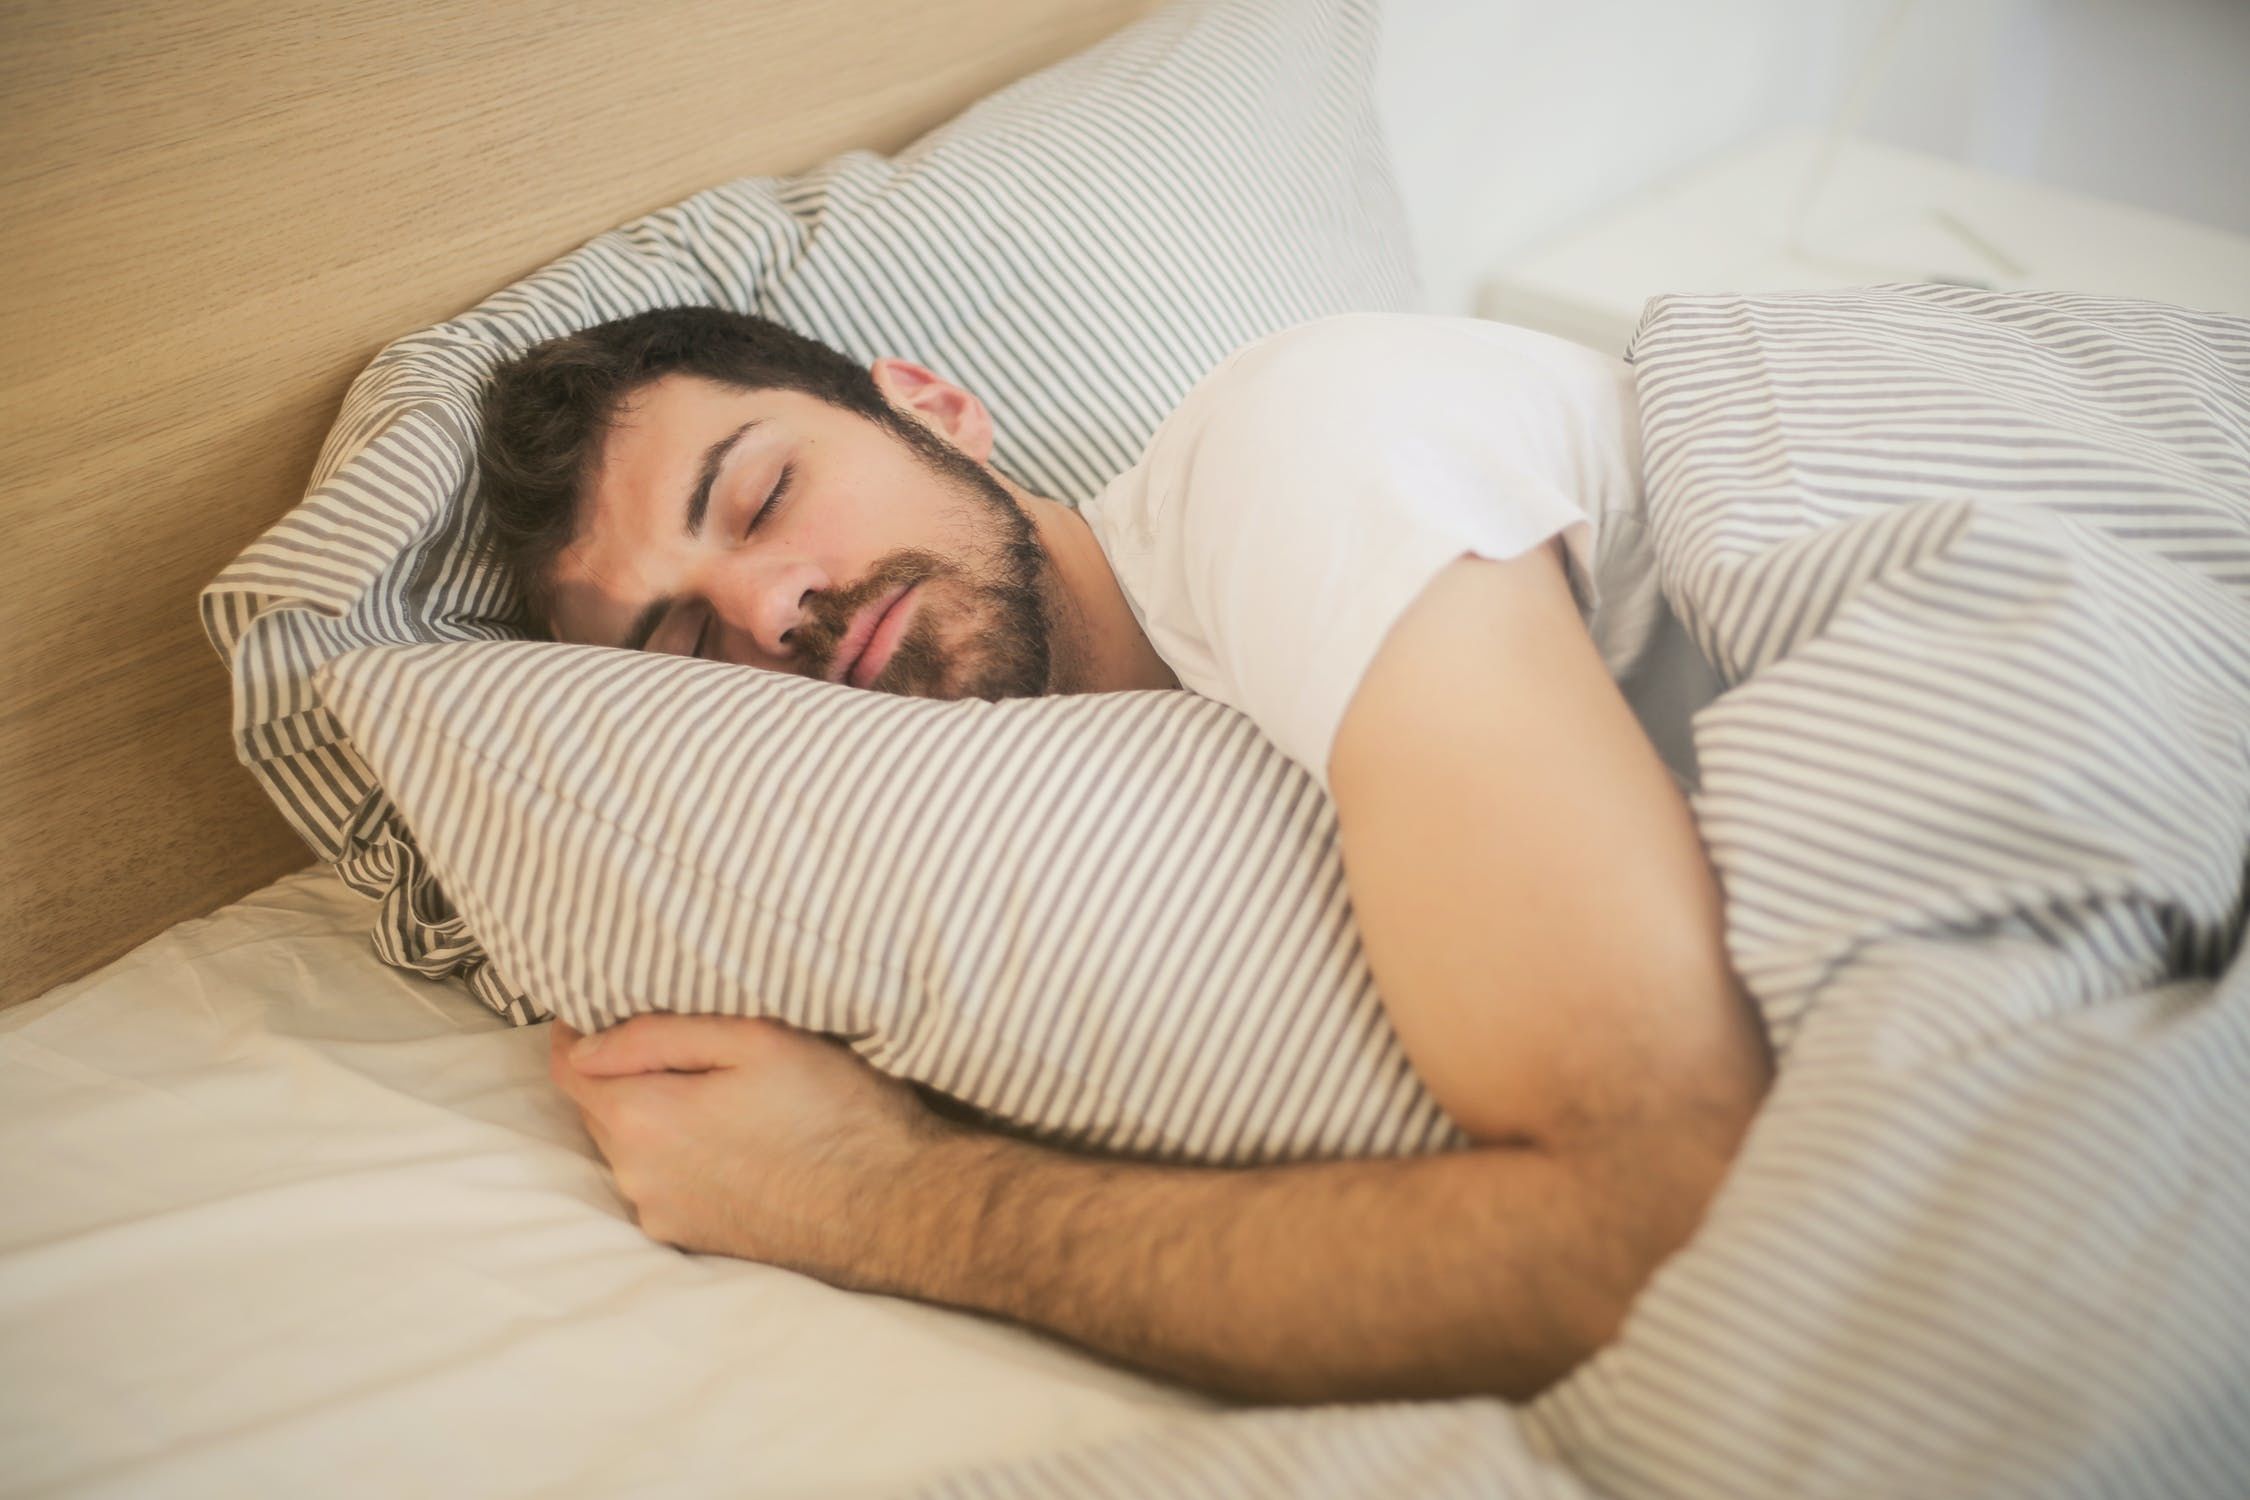 5 Facts About How Sleeping Can Improve Your Wellbeing